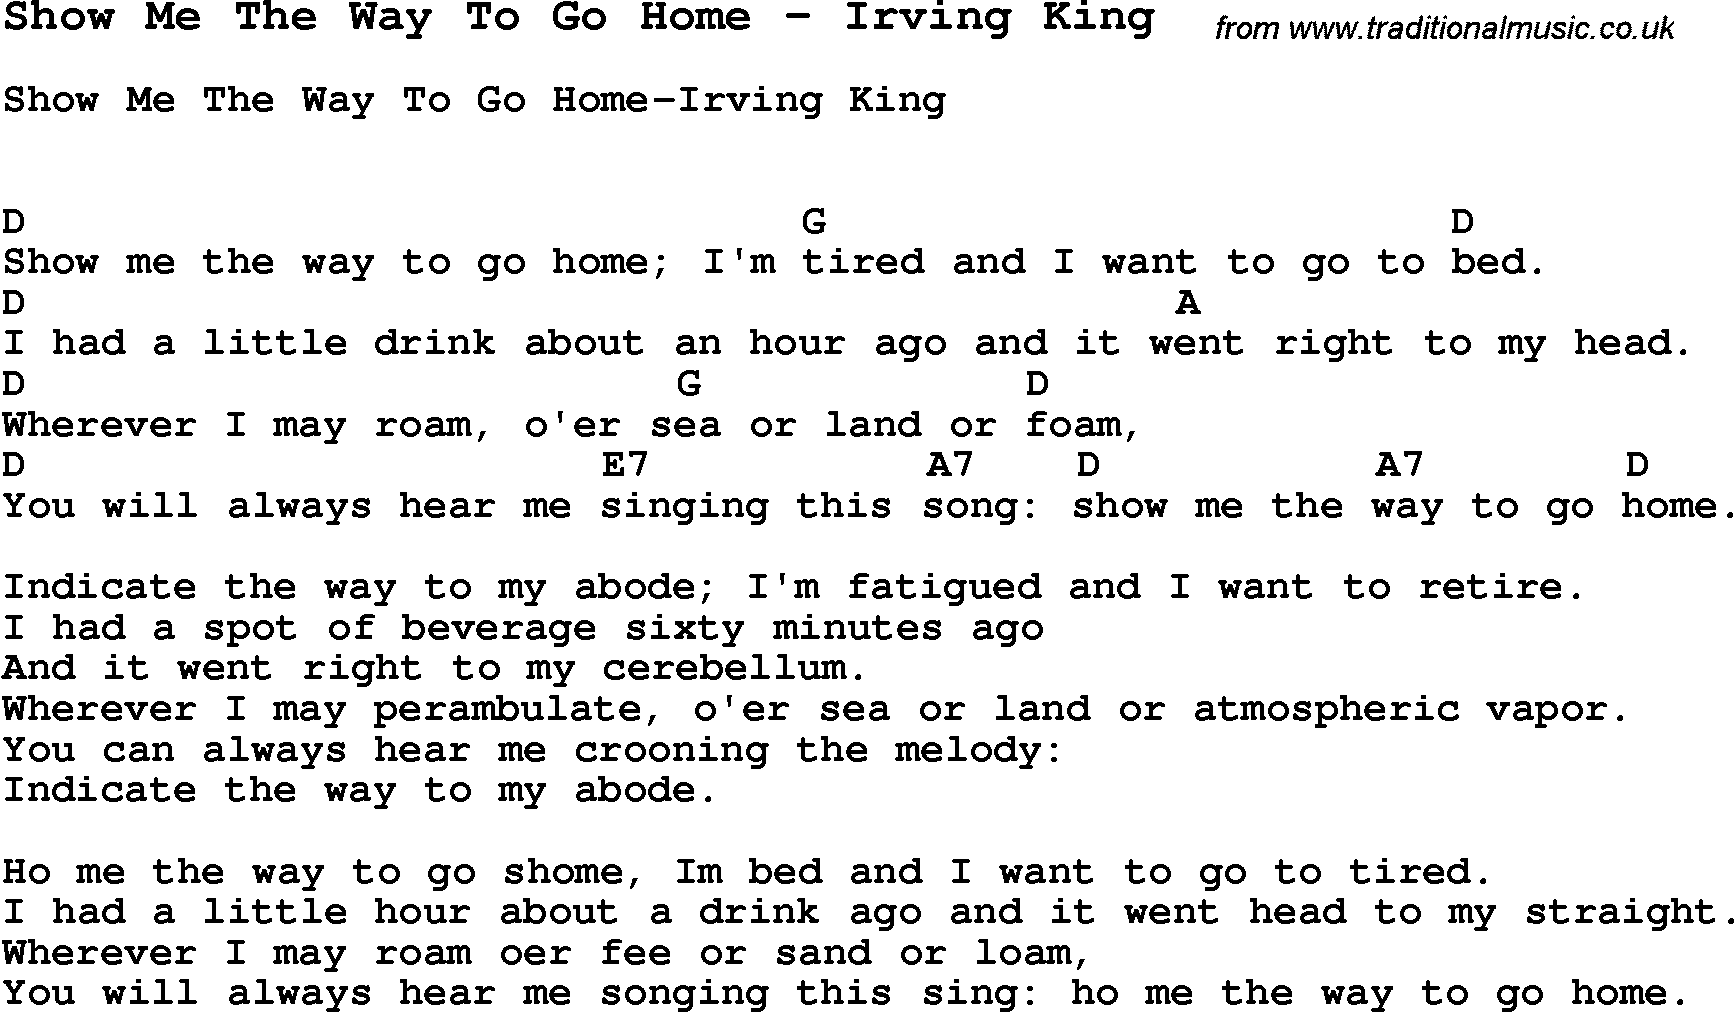 Song Show Me The Way To Go Home by Irving King, with lyrics for vocal performance and accompaniment chords for Ukulele, Guitar Banjo etc.